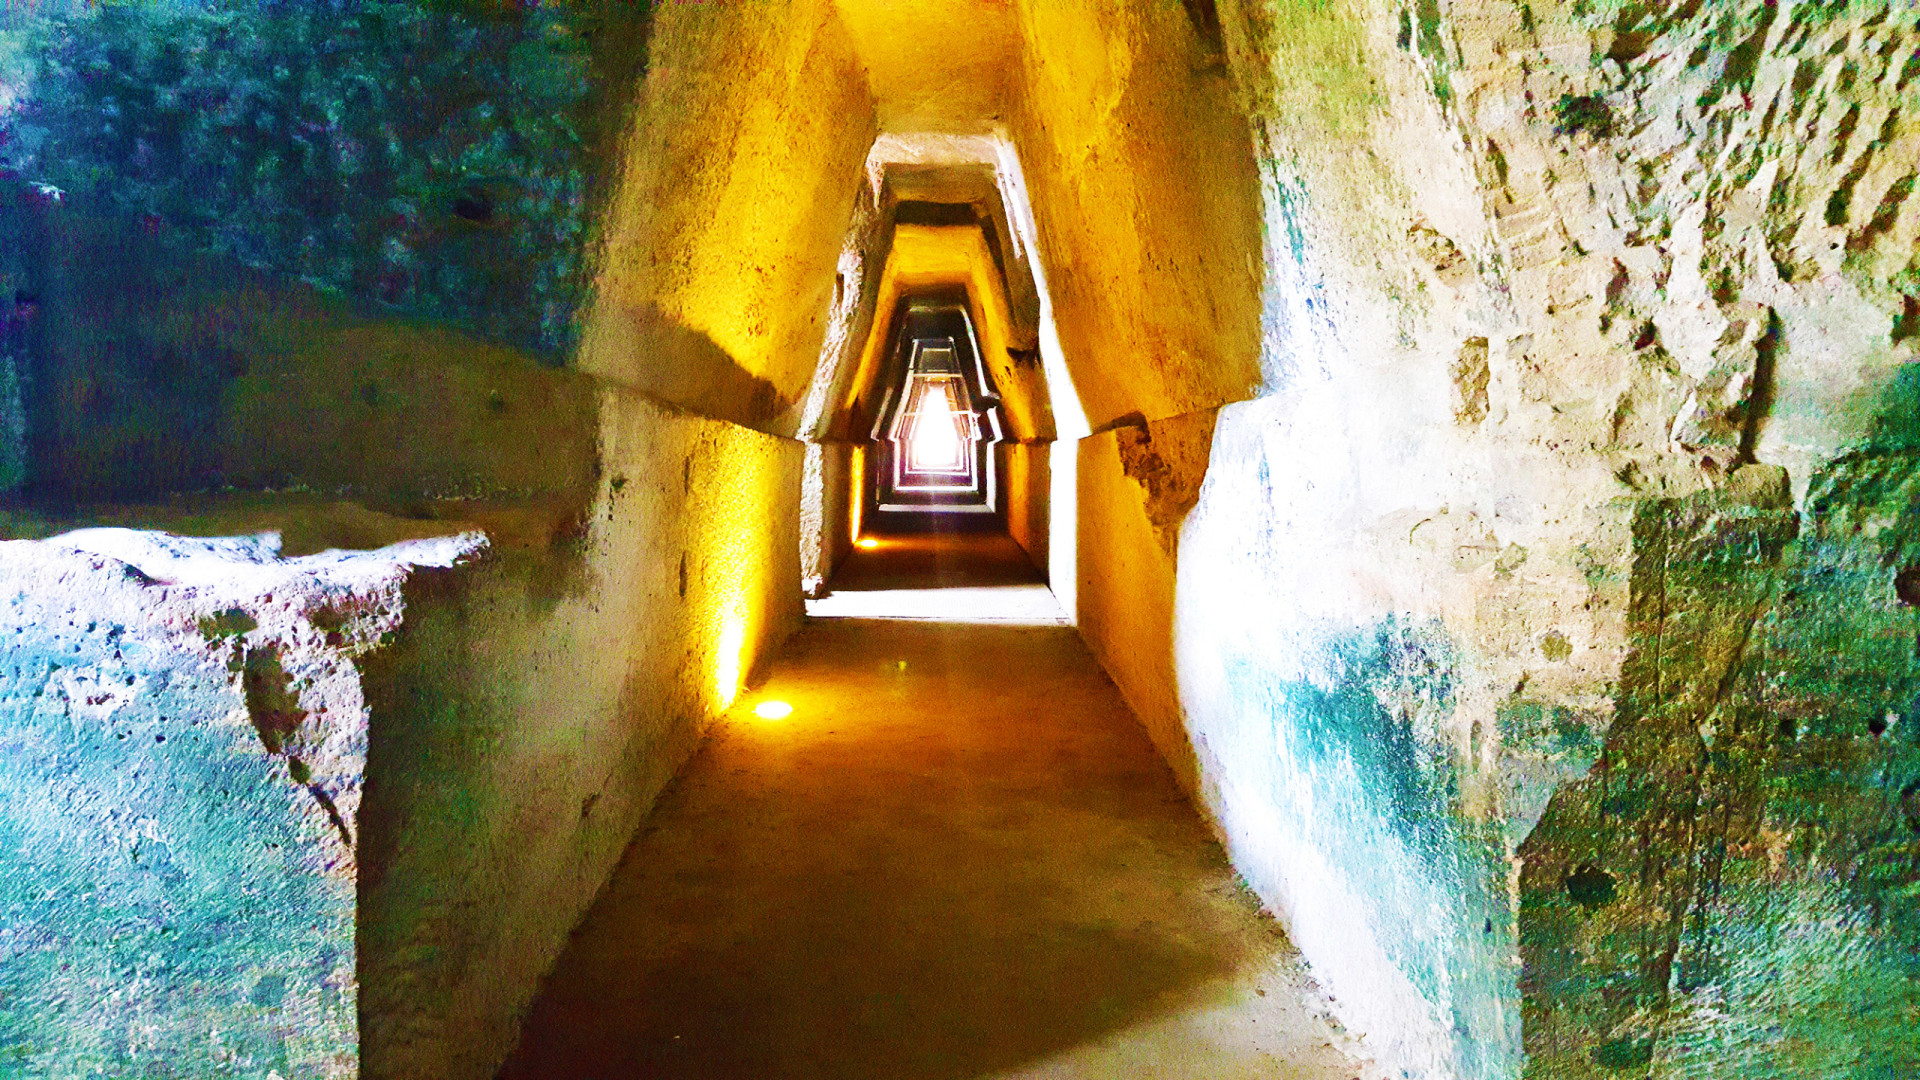 <p>Naples also has a gateway to hell called the Cave of the Sibyl, which was described by Virgil over 2,000 years ago in 'The Aeneid.'</p><p><a href="https://www.msn.com/en-us/community/channel/vid-7xx8mnucu55yw63we9va2gwr7uihbxwc68fxqp25x6tg4ftibpra?cvid=94631541bc0f4f89bfd59158d696ad7e">Follow us and access great exclusive content every day</a></p>